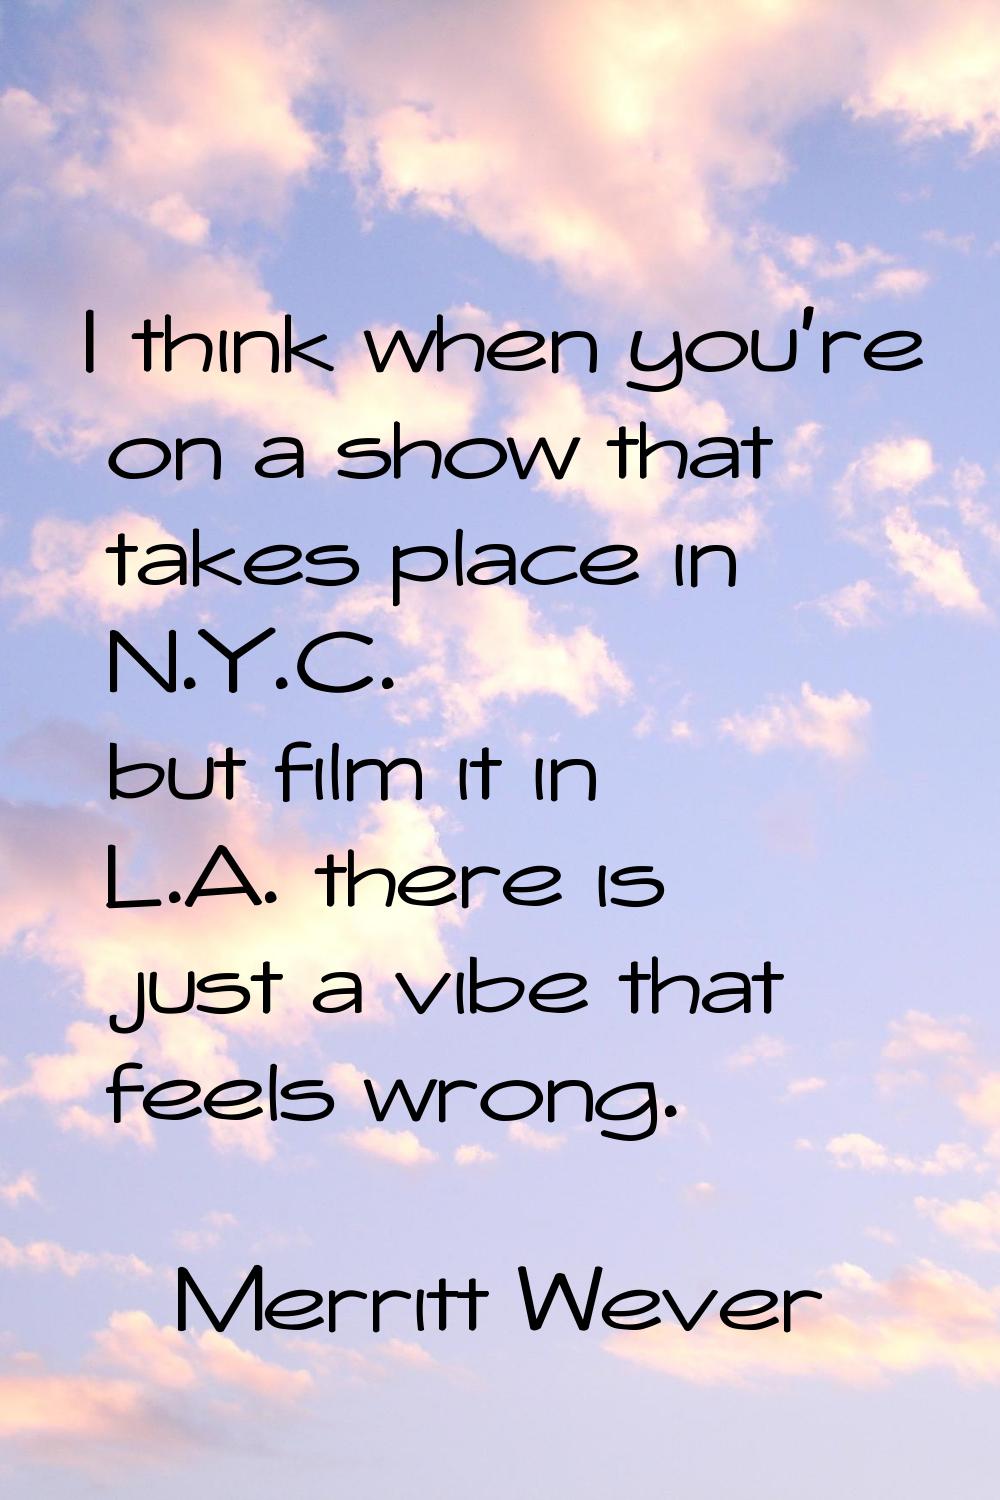 I think when you're on a show that takes place in N.Y.C. but film it in L.A. there is just a vibe t